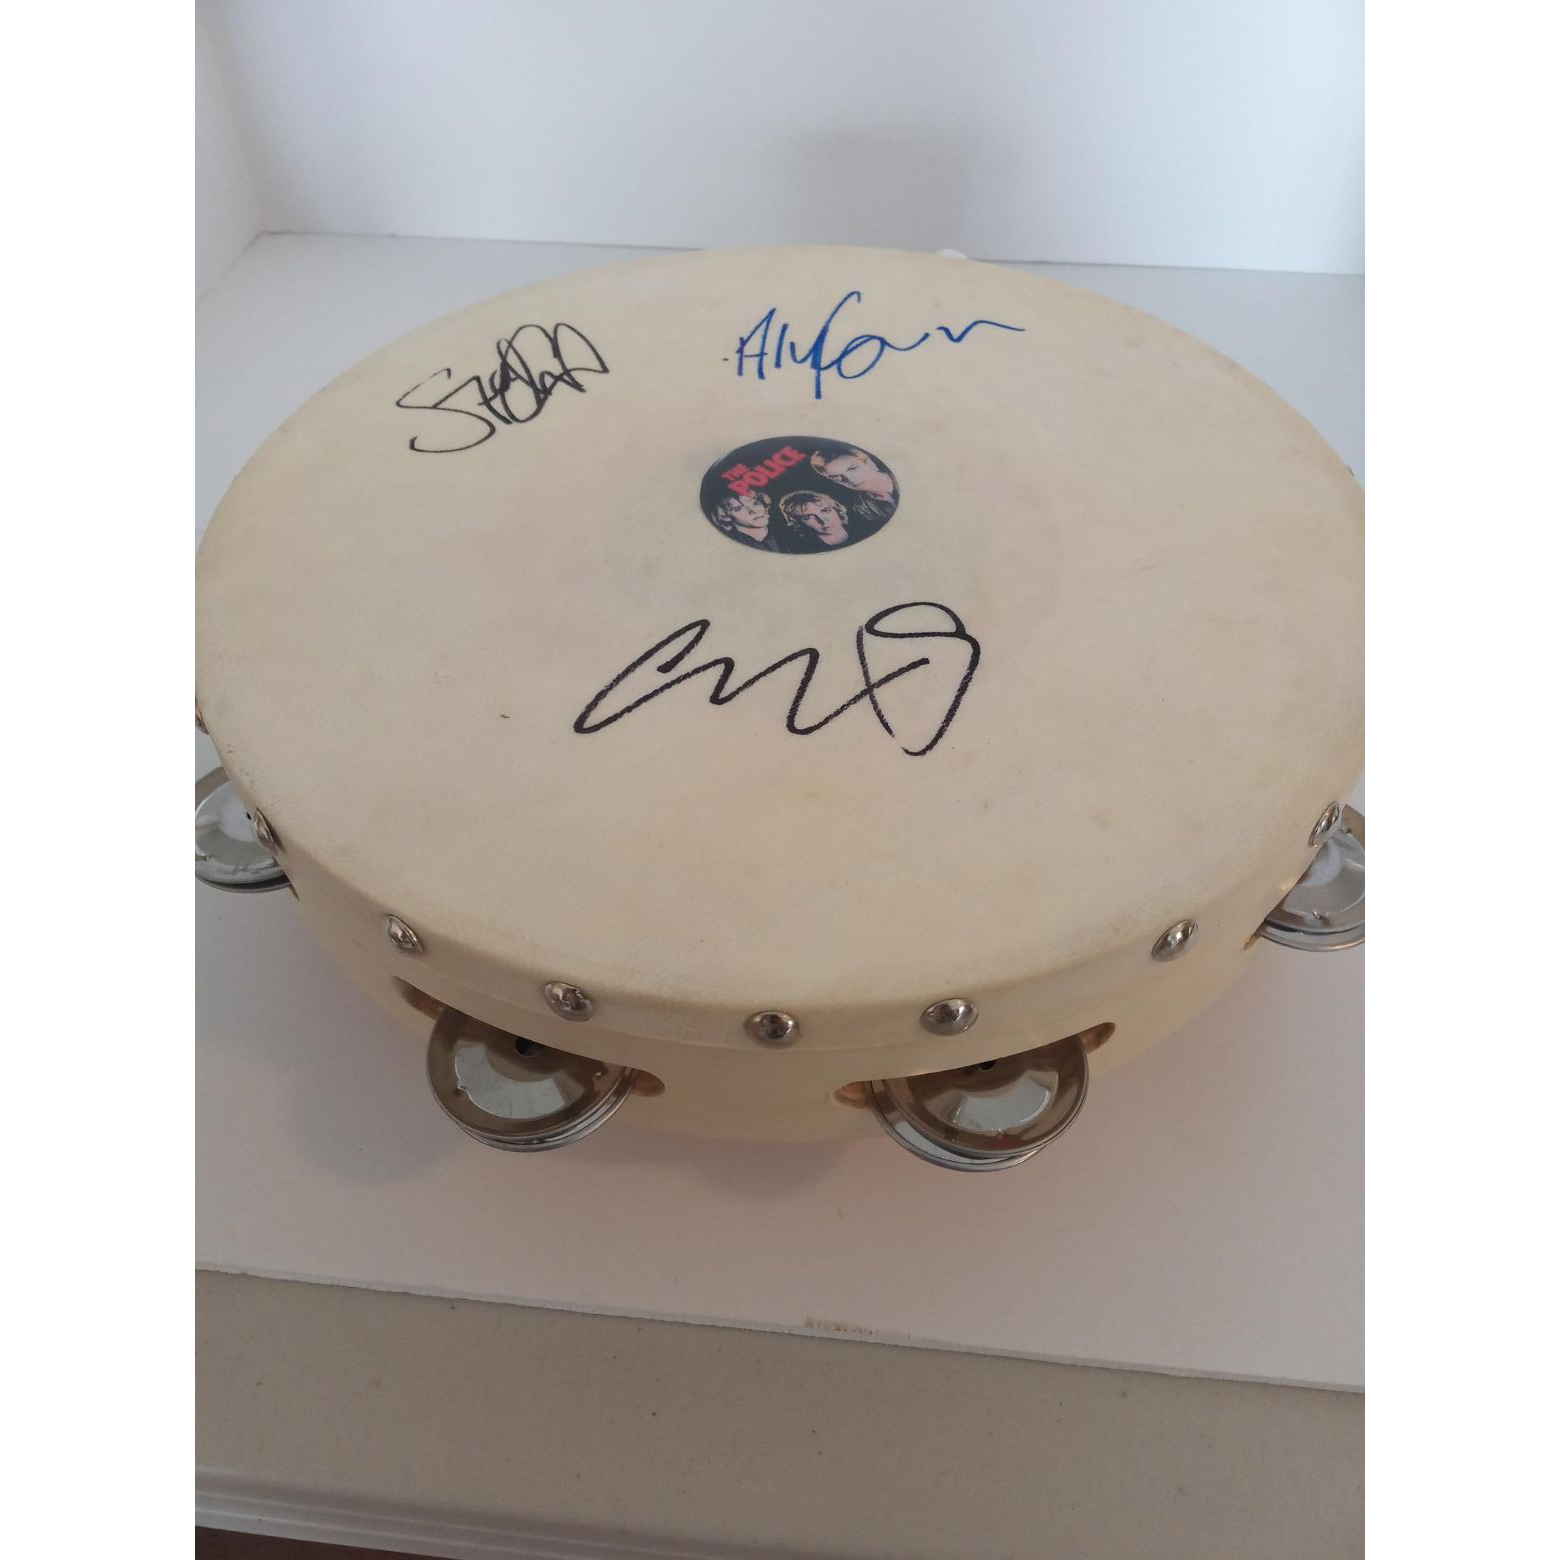 Sting Gordon Sumner, Andy Summer, Stewart Copeland, The Police 14-inch tambourine signed with proof